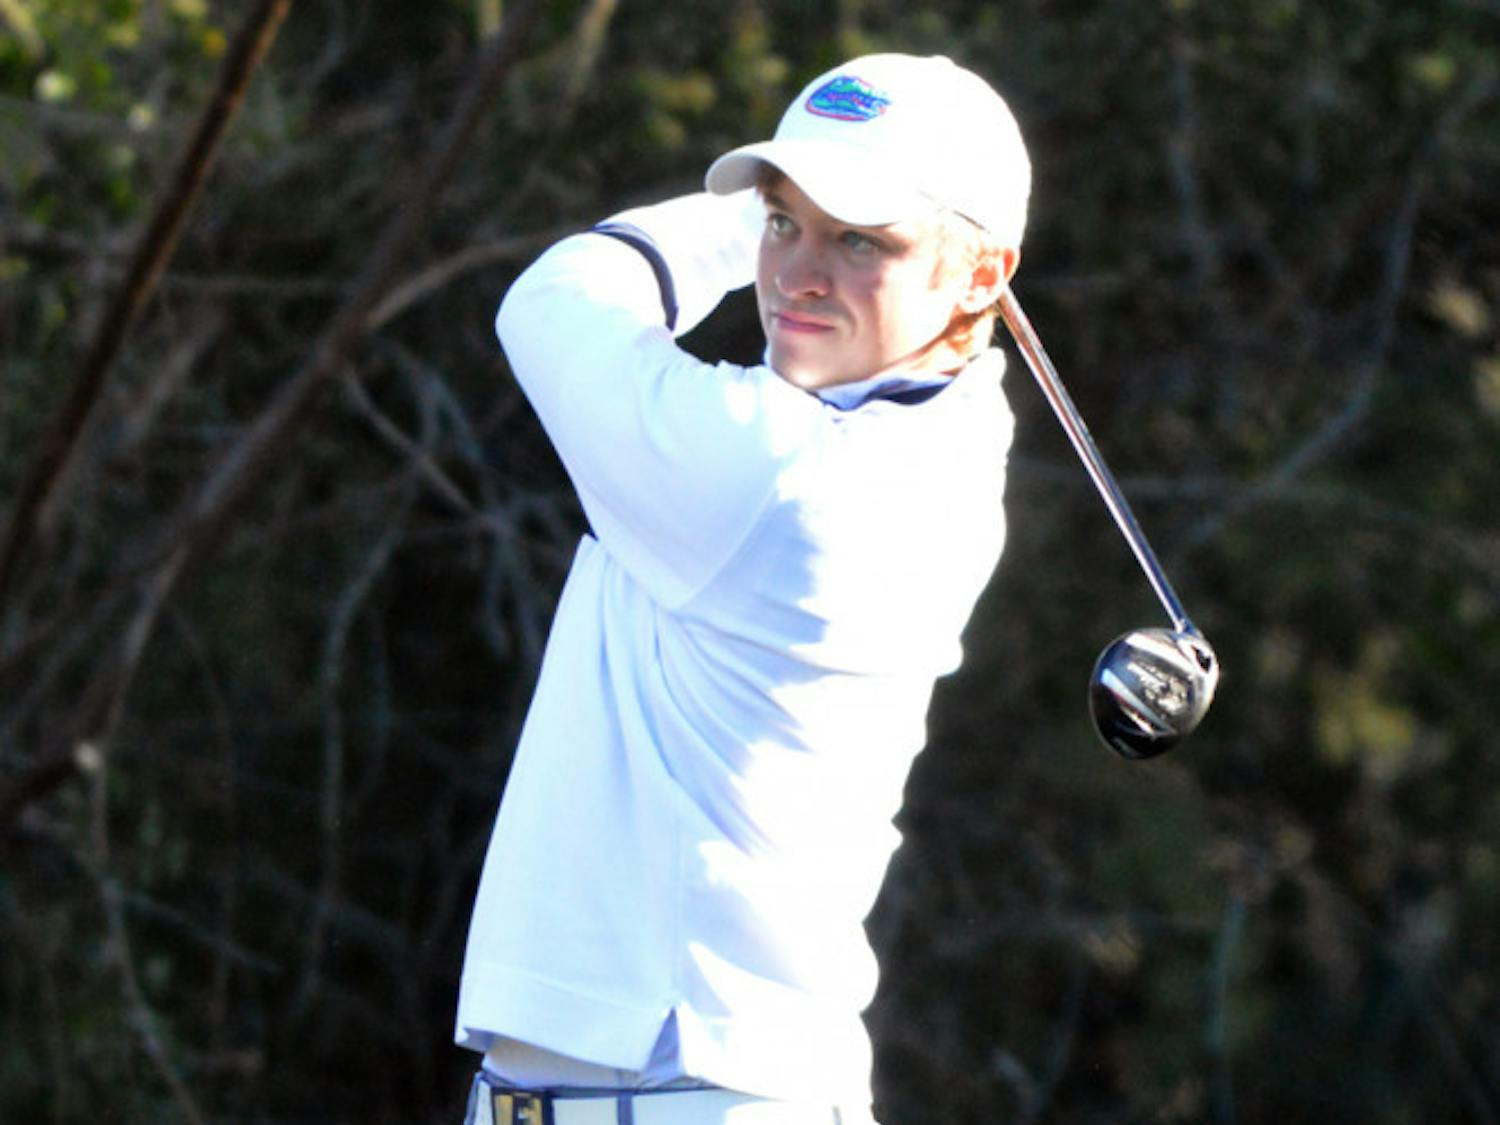 Eric Banks tees off during Day 2 of the SunTrust Gator Invitational on Feb. 16 at the Mark Bostick Golf Course.